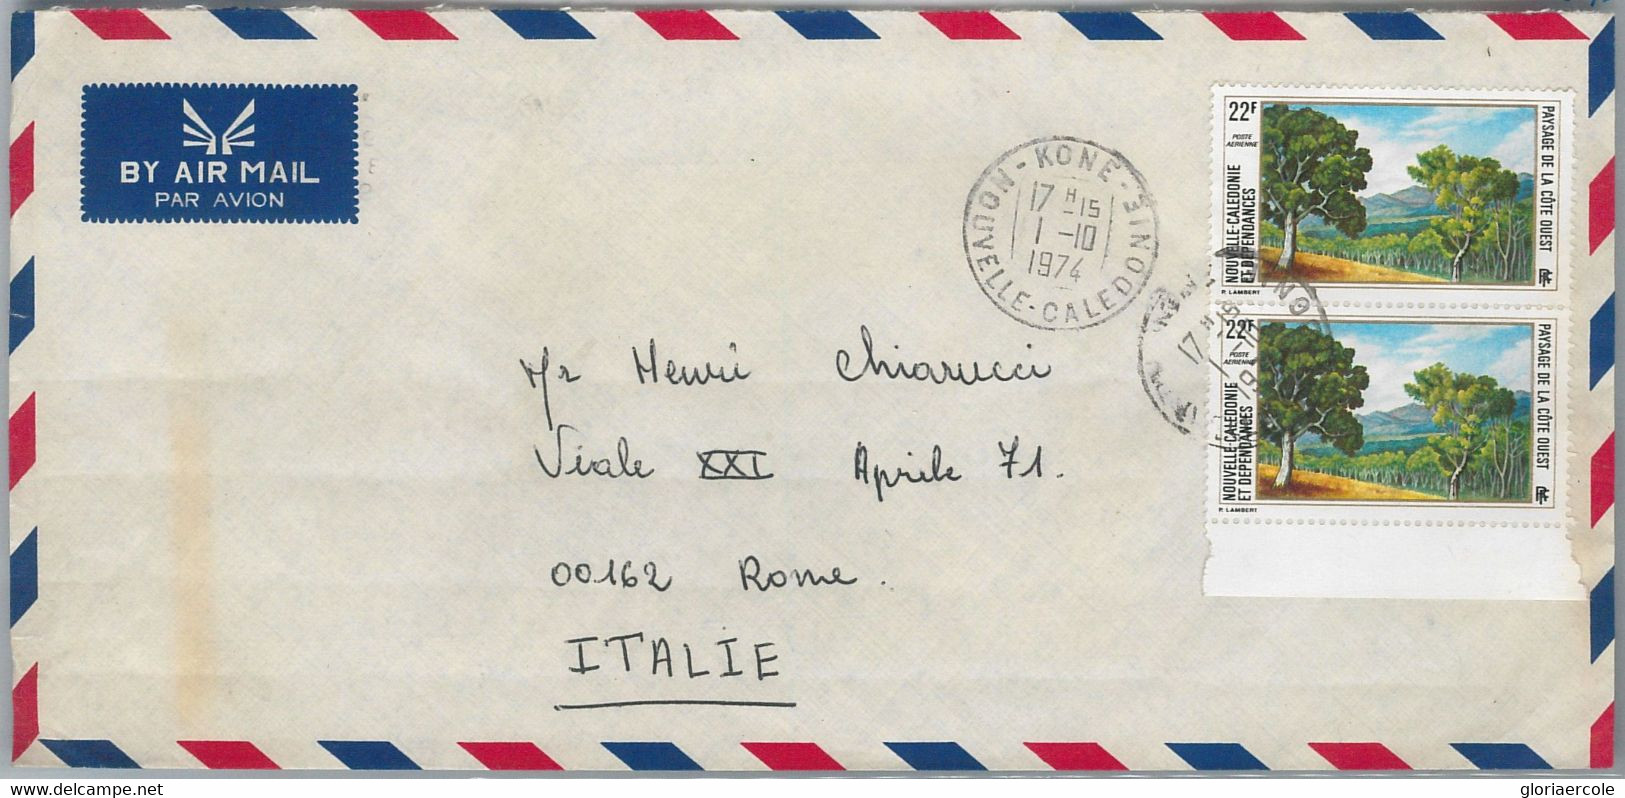 57369 - NOUVELLE CALEDONIE - POSTAL HISTORY - Airmail Cover To ITALY  1974 - Covers & Documents